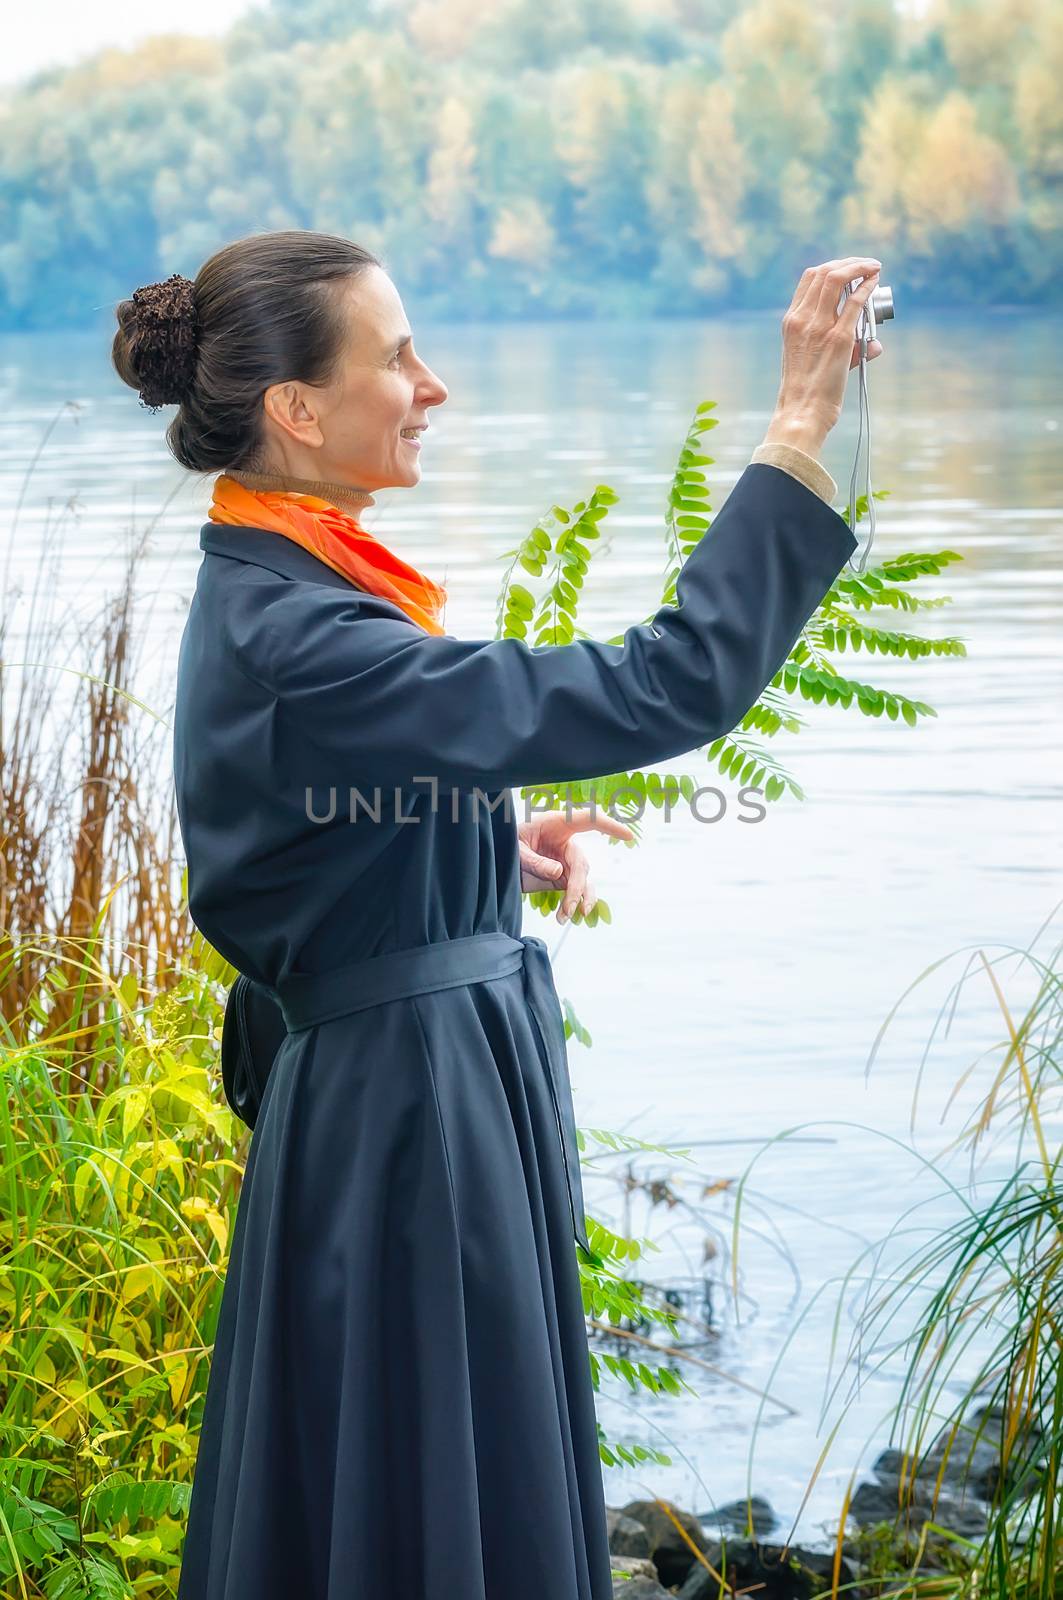 Elegant senior business woman with a digital camera, a bag and an orange scarf, taking pictures along the river